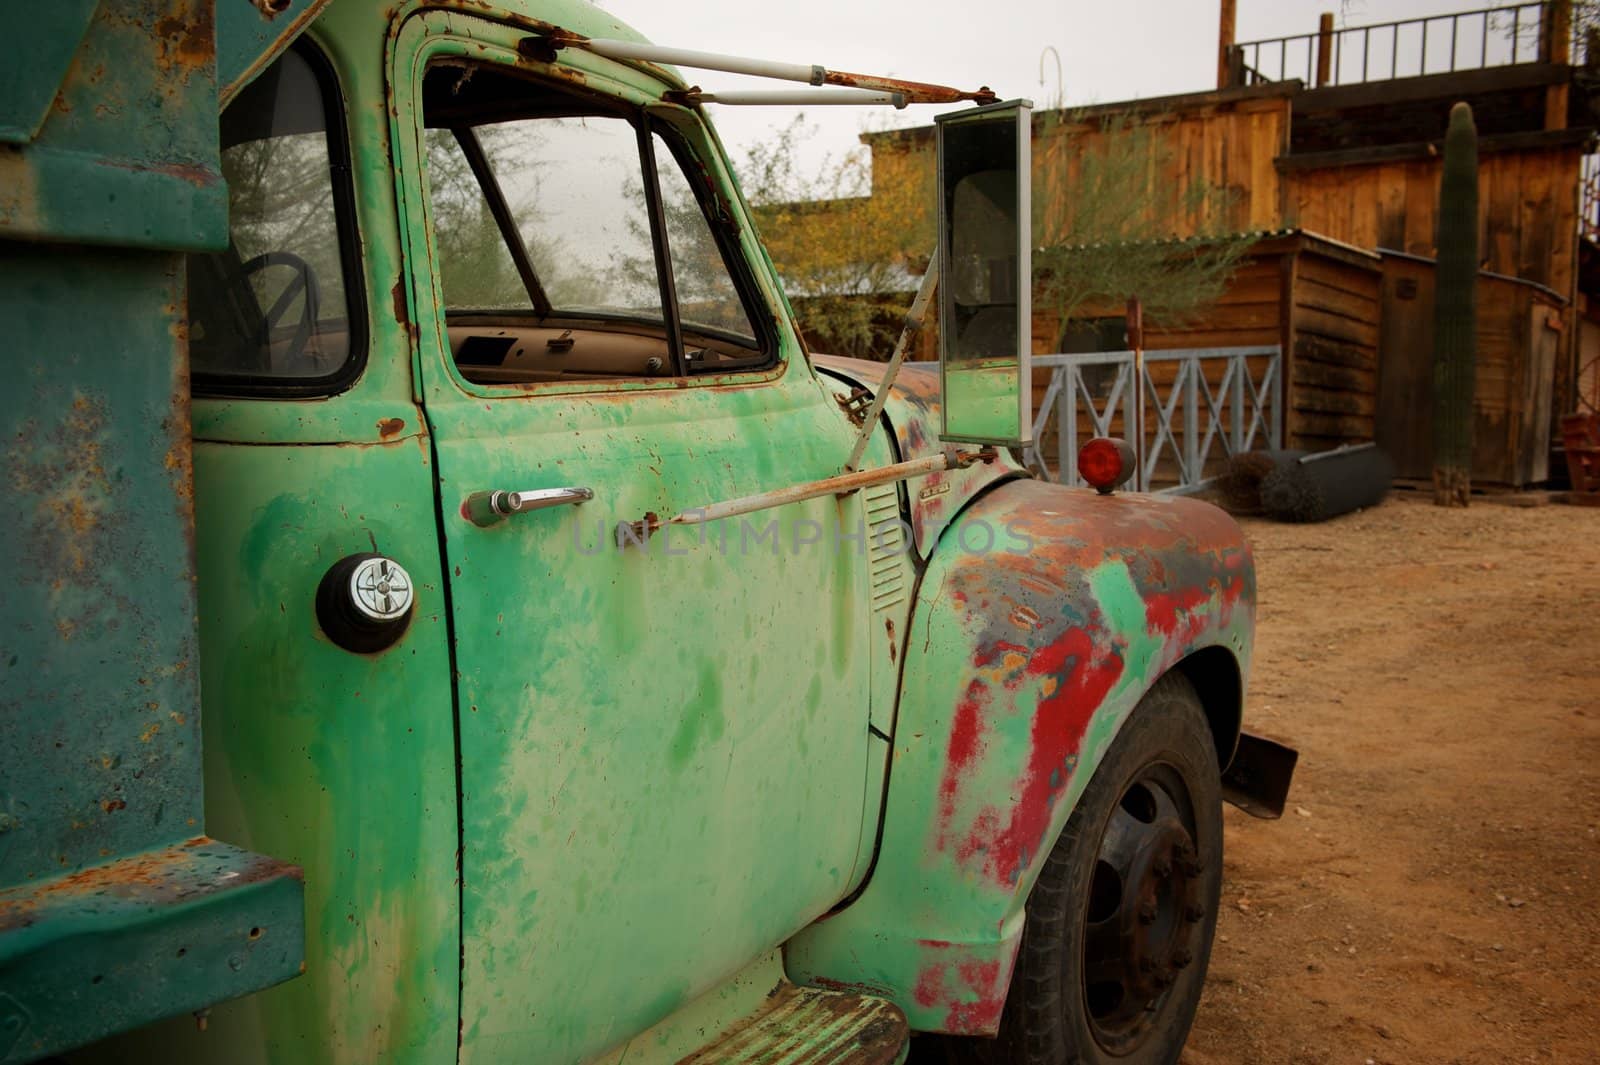 A Rusty old truck with patches of green and red paint in an old western town